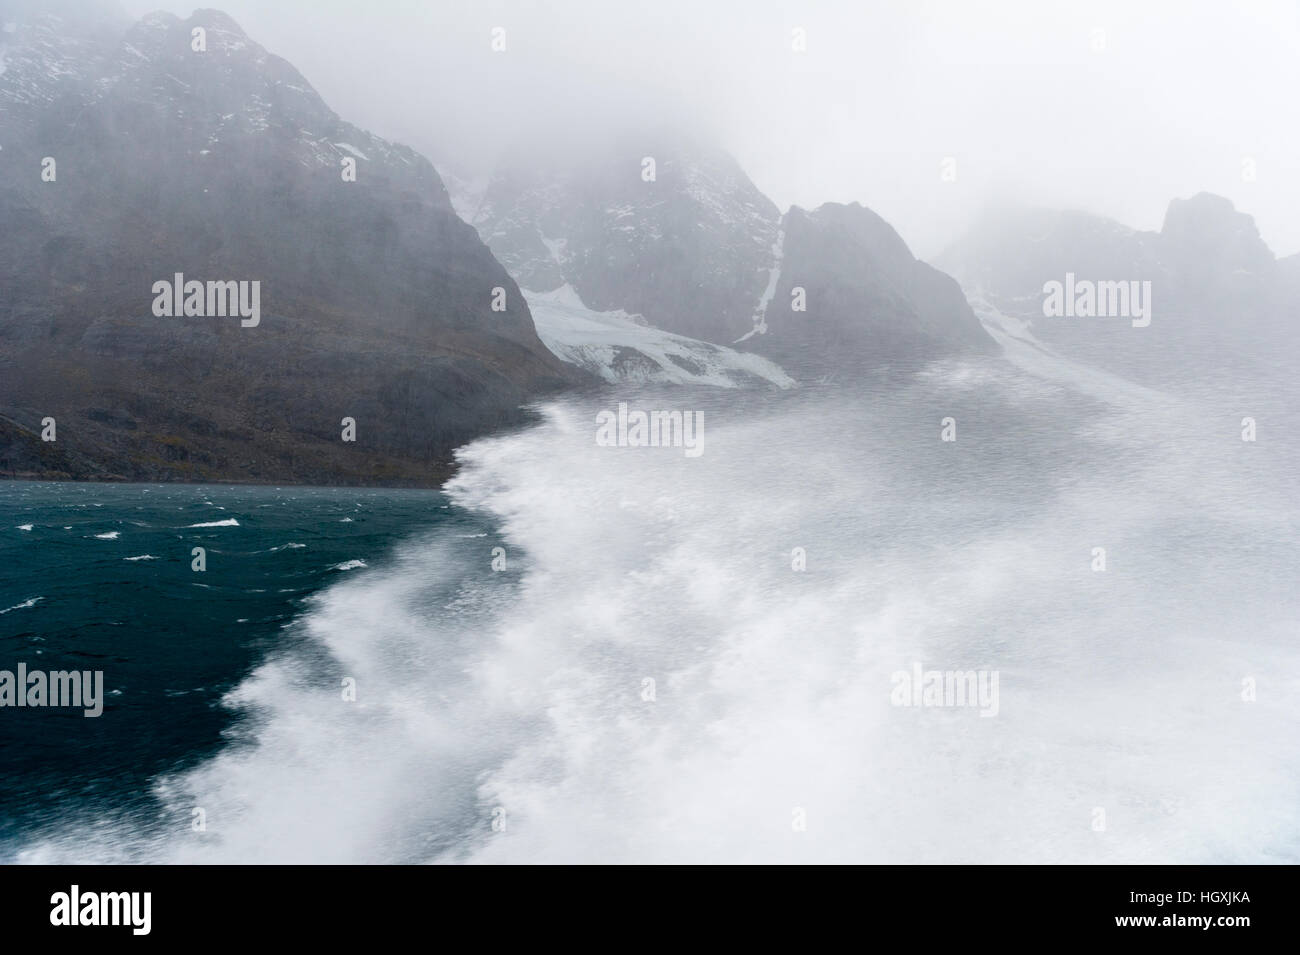 A boats passage through rough seas sends waves and spray into the air beneath jagged mountains. Stock Photo